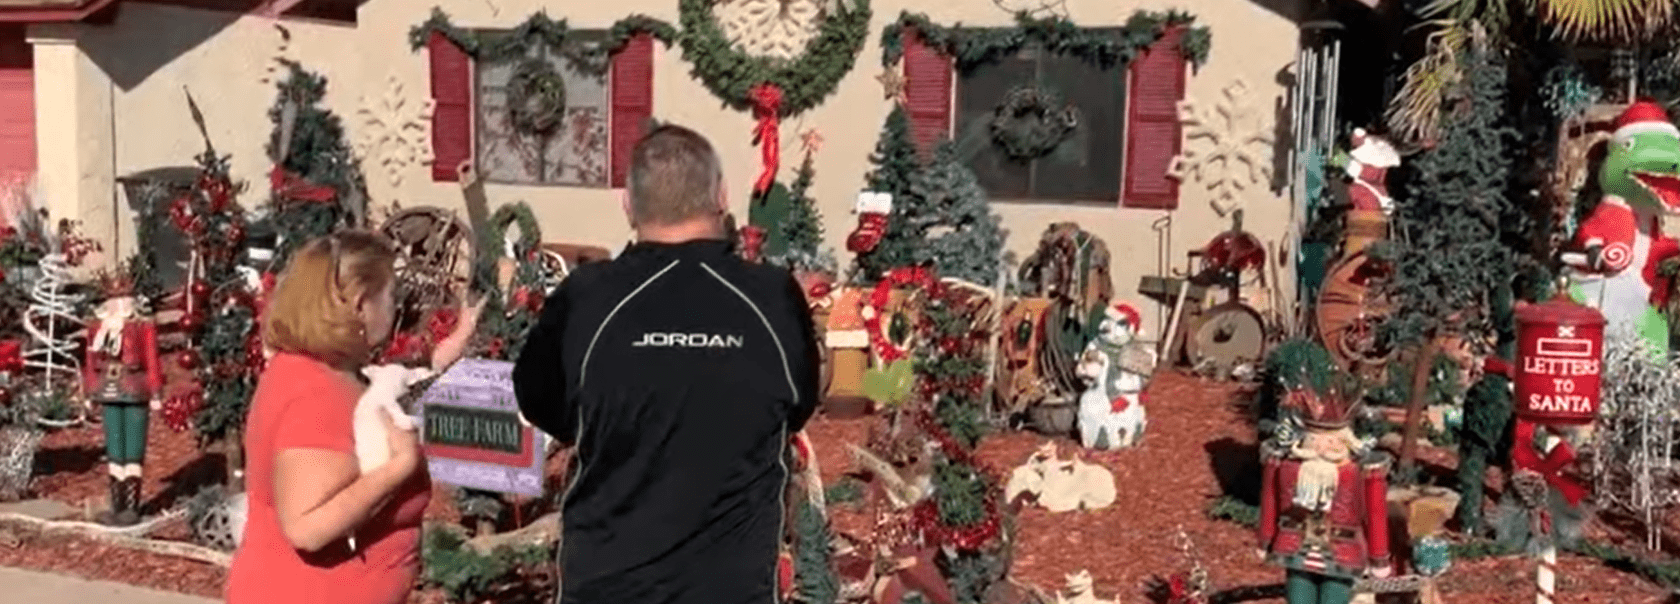 Andrew Kuzyk and his wife Pamela Kuzyk standing in front of the Christmas prize Pamela put together for her husband.┃Source:youtube.com/ABC15 Arizona